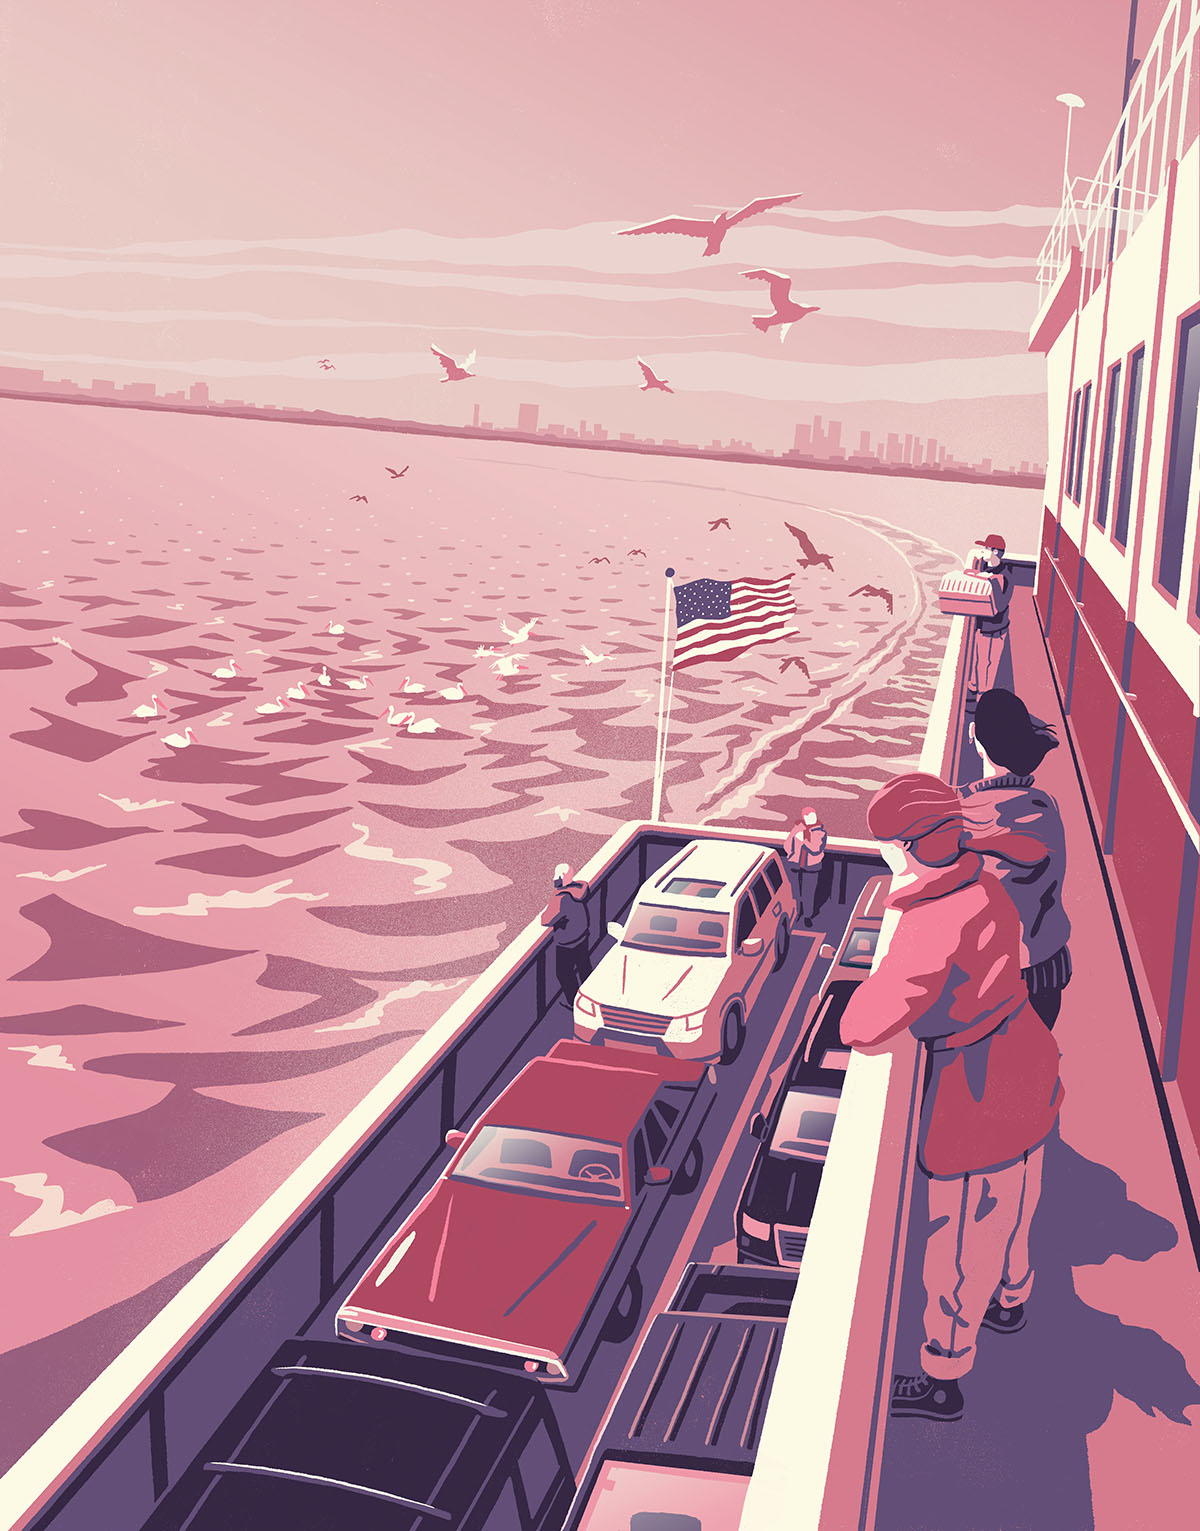 An illustration of people looking over the railing of a ferry with cars and buildings far in the distance